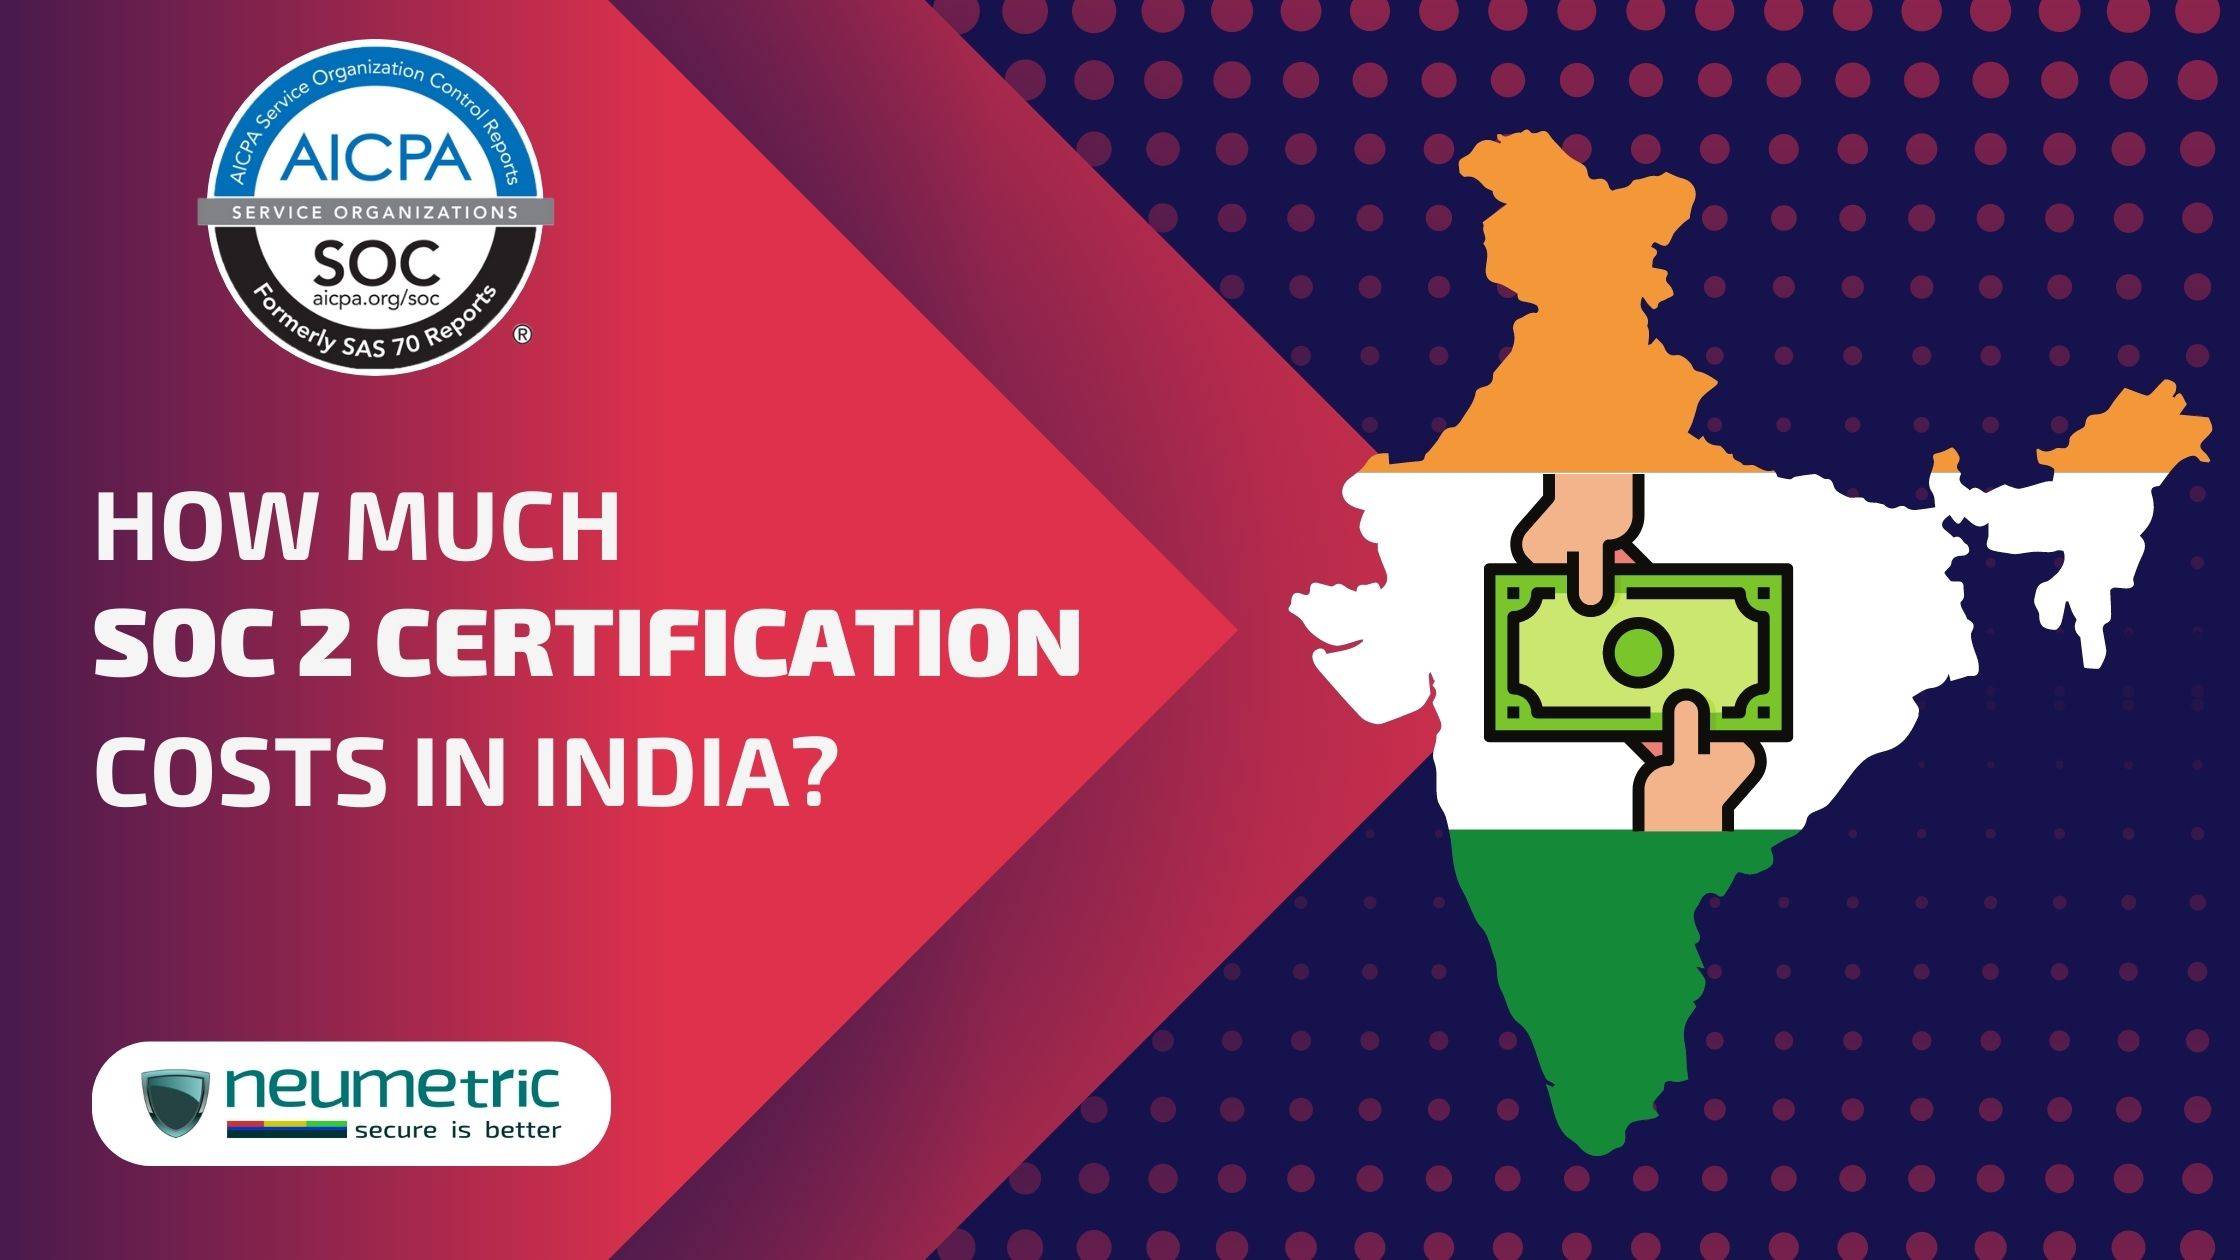 How much SOC 2 Certification Cost for an Organisation in India?